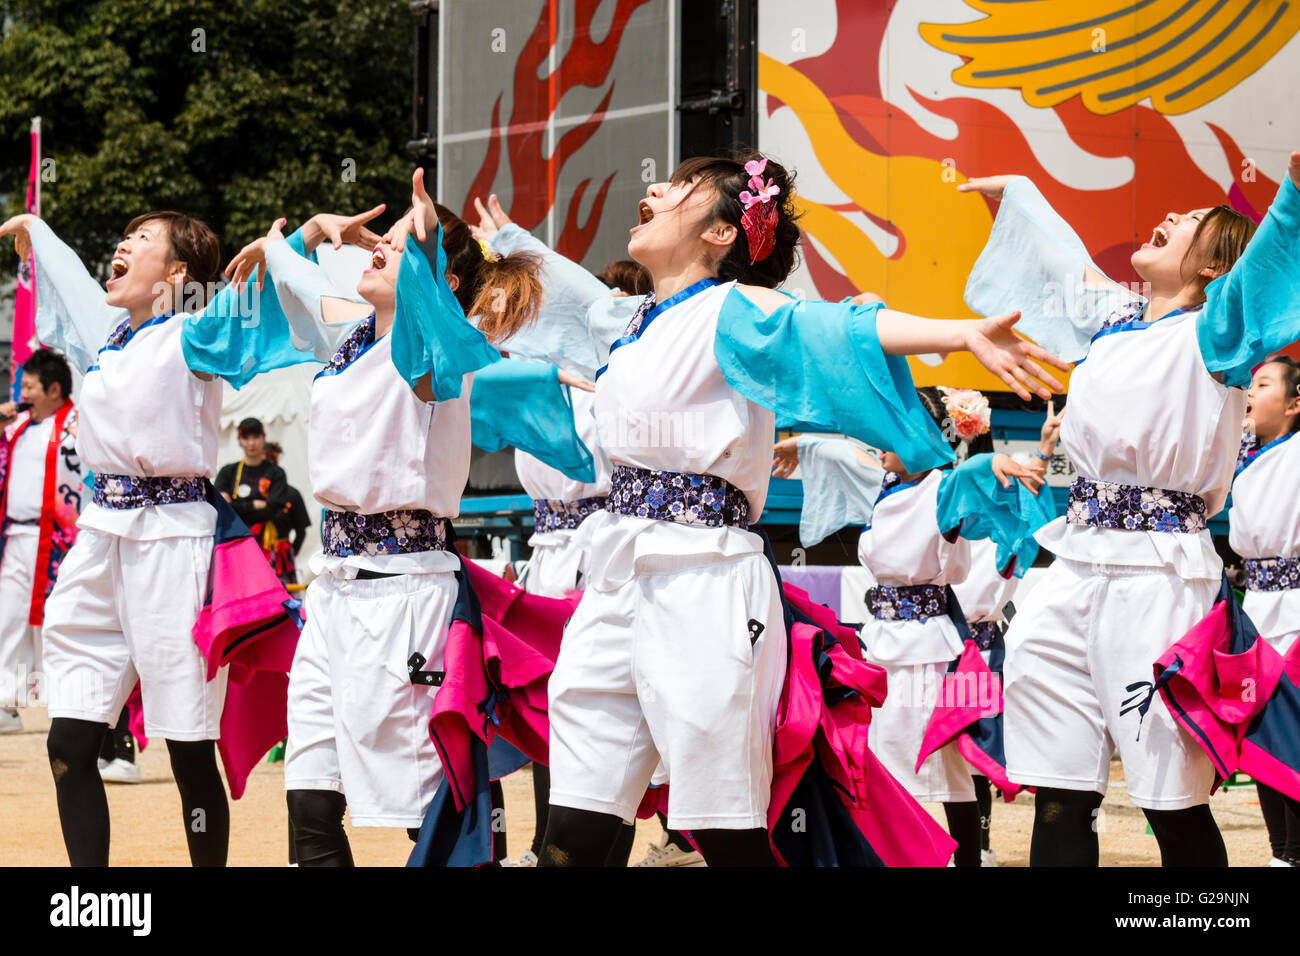 Women team in white and turquoise happi jackets, dancing outdoors, in rows, during the Hinokuni Yosakoi dance festival in Kumamoto, Japan. Stock Photo